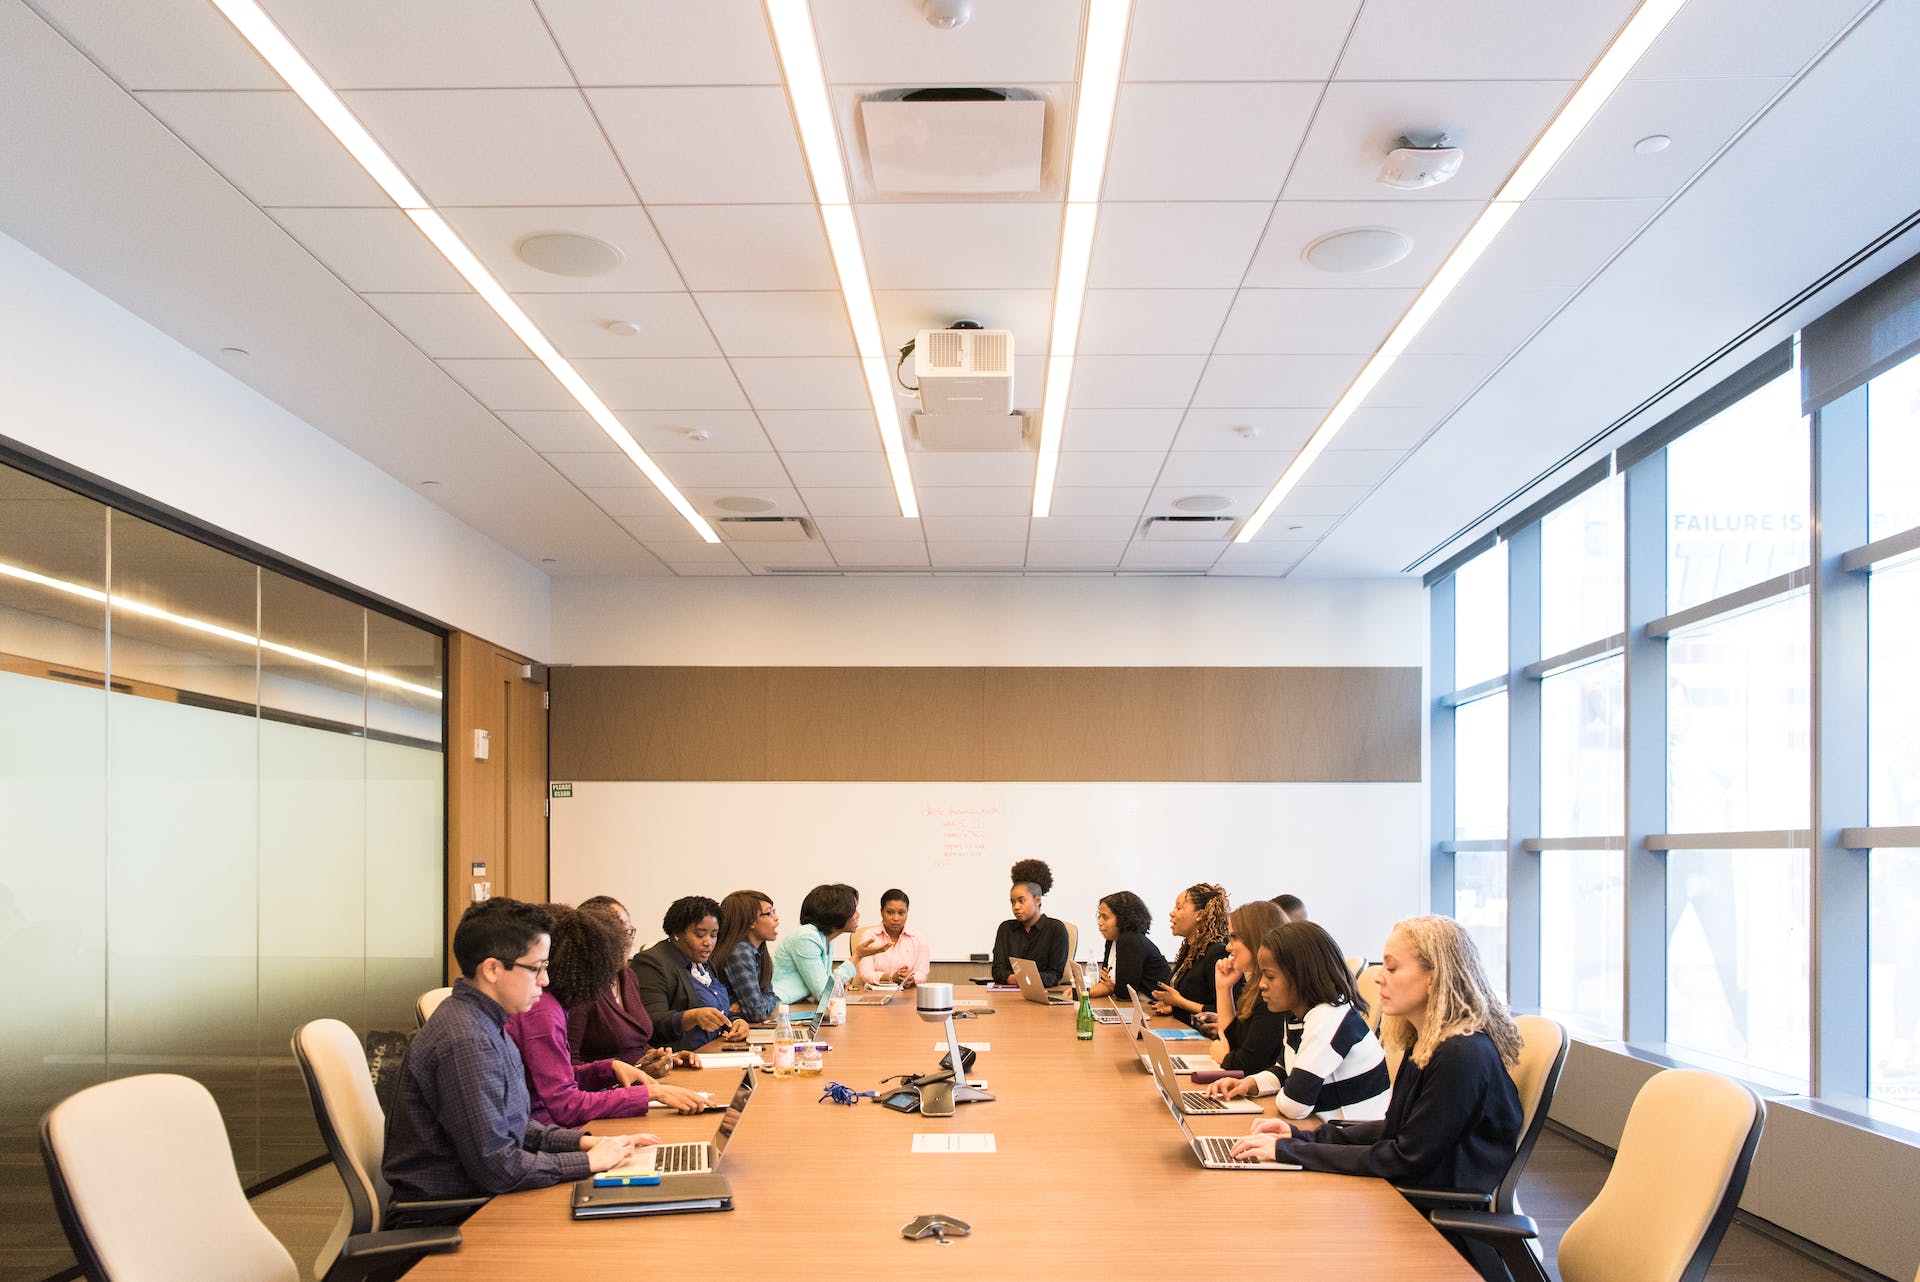 People in a conference room | Source: Pexels